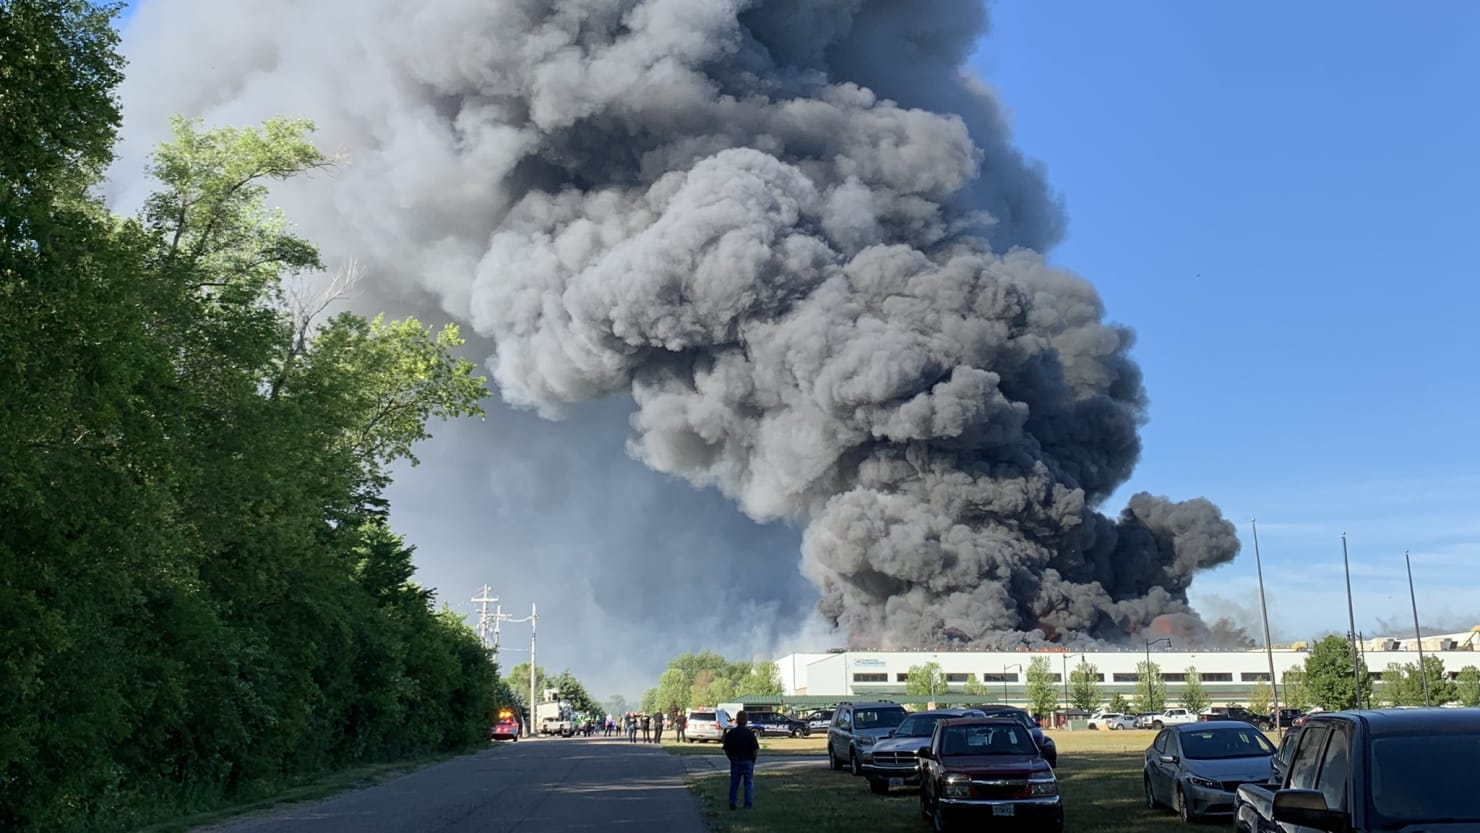 Fire Chief Fears Chemtool Plant Blaze in Rockton, Illinois, Could Cause ...